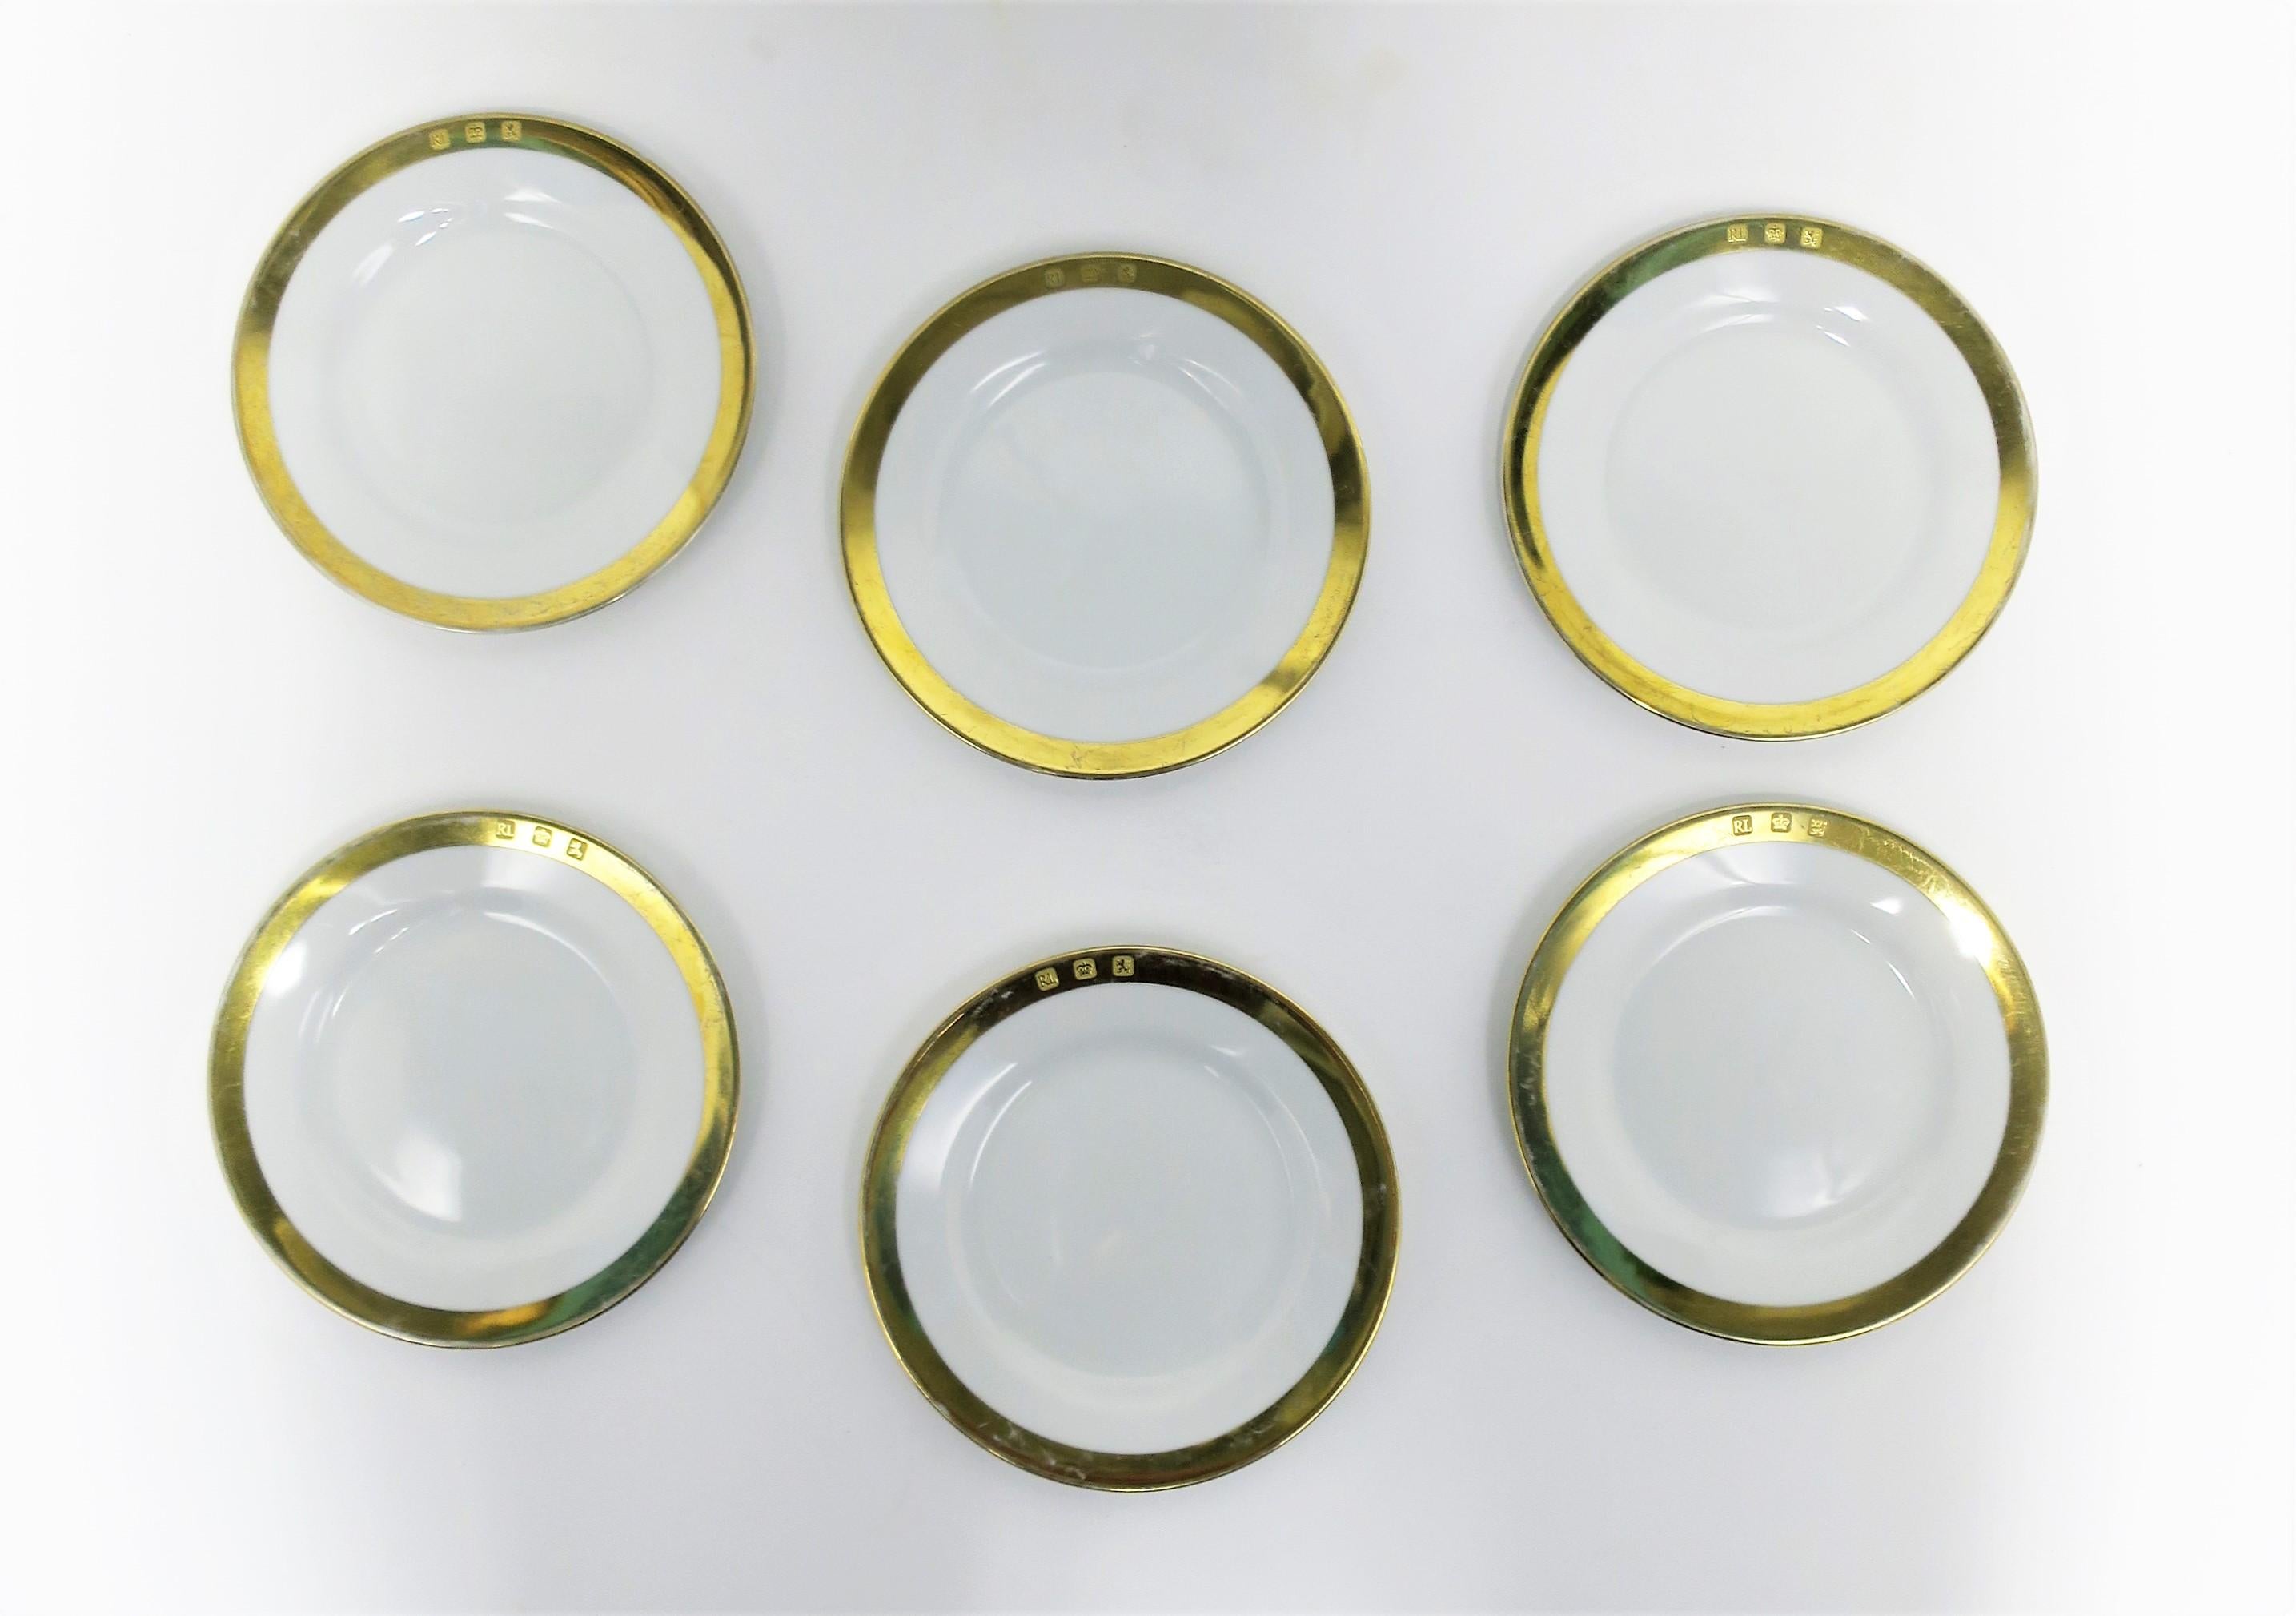 A 1990s vintage set of six (6) appetizer or bread and butter white porcelain plates with gold detail from American fasion design house Ralph Lauren, 1995. Plates in the 